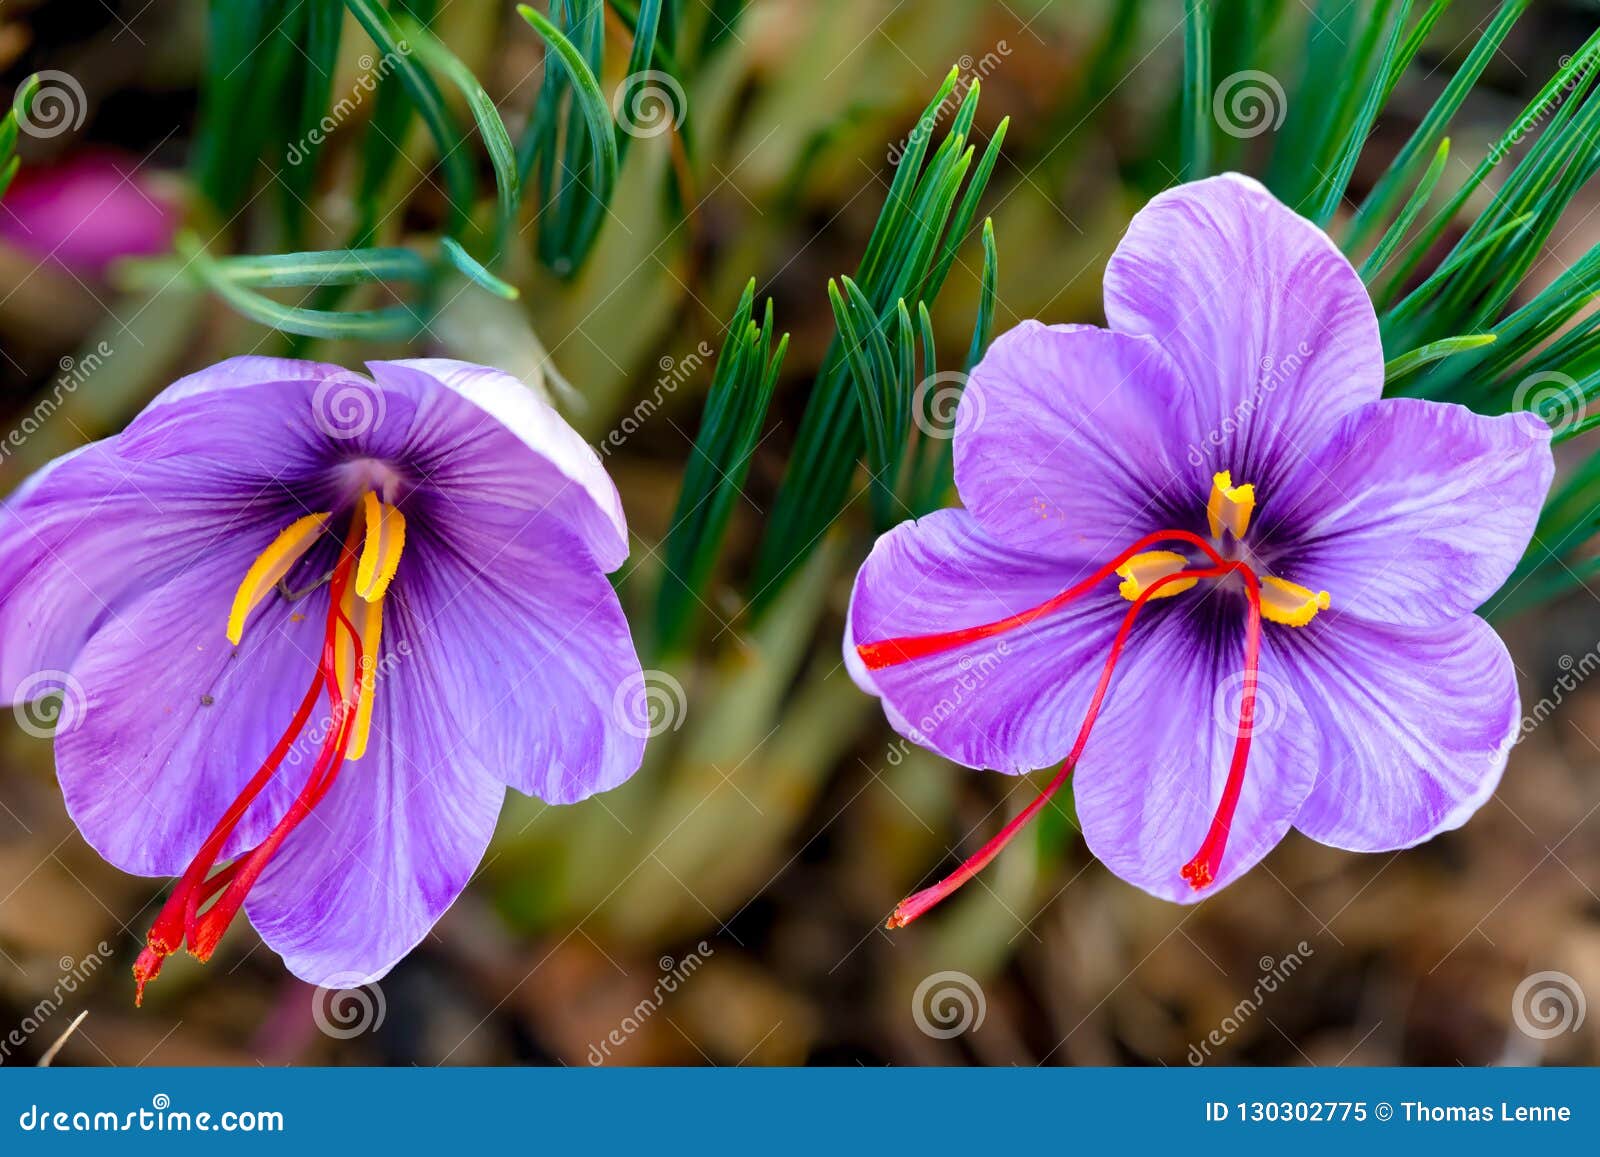 saffron is a spice derived from the flower of crocus sativus.